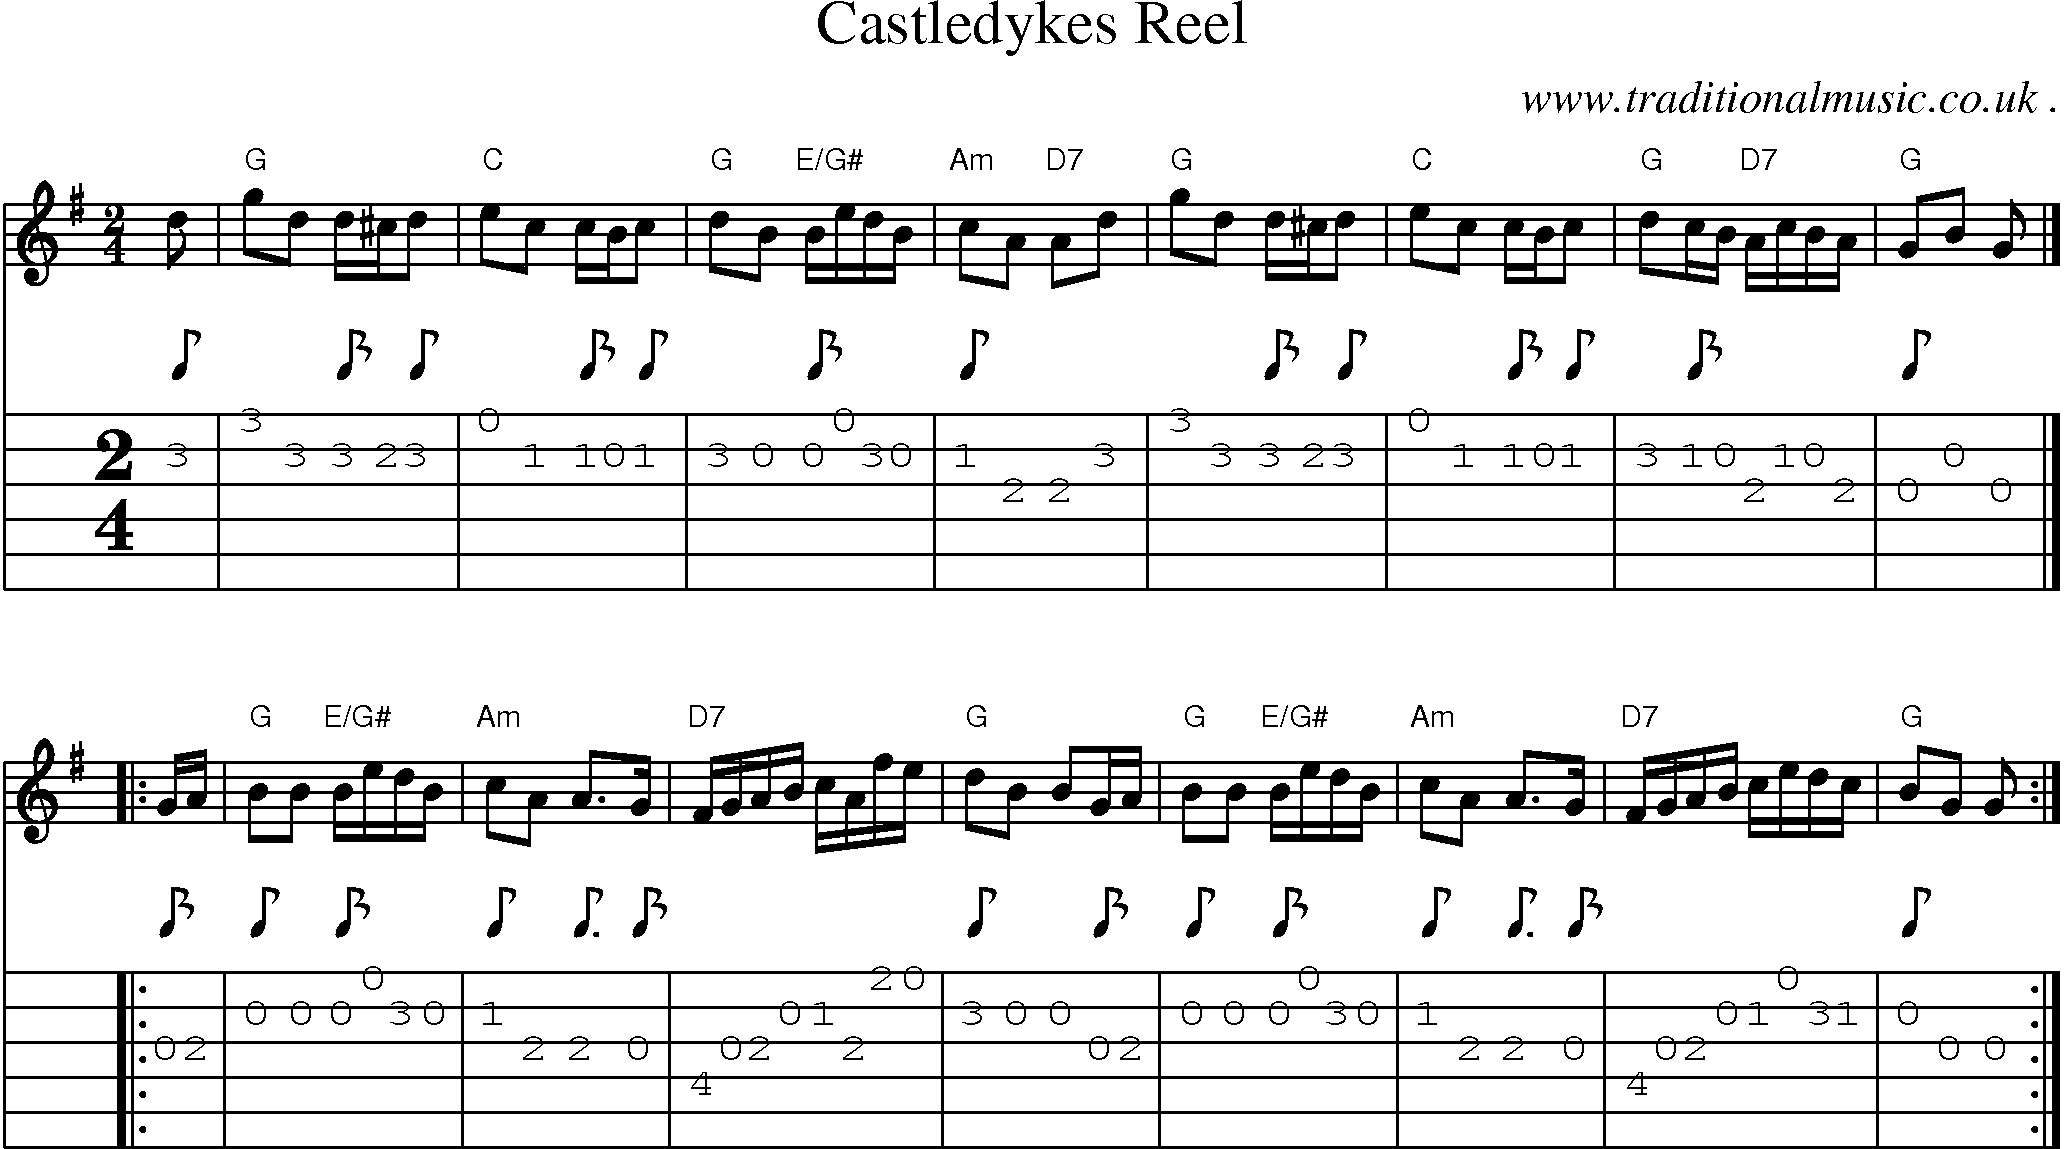 Sheet-music  score, Chords and Guitar Tabs for Castledykes Reel